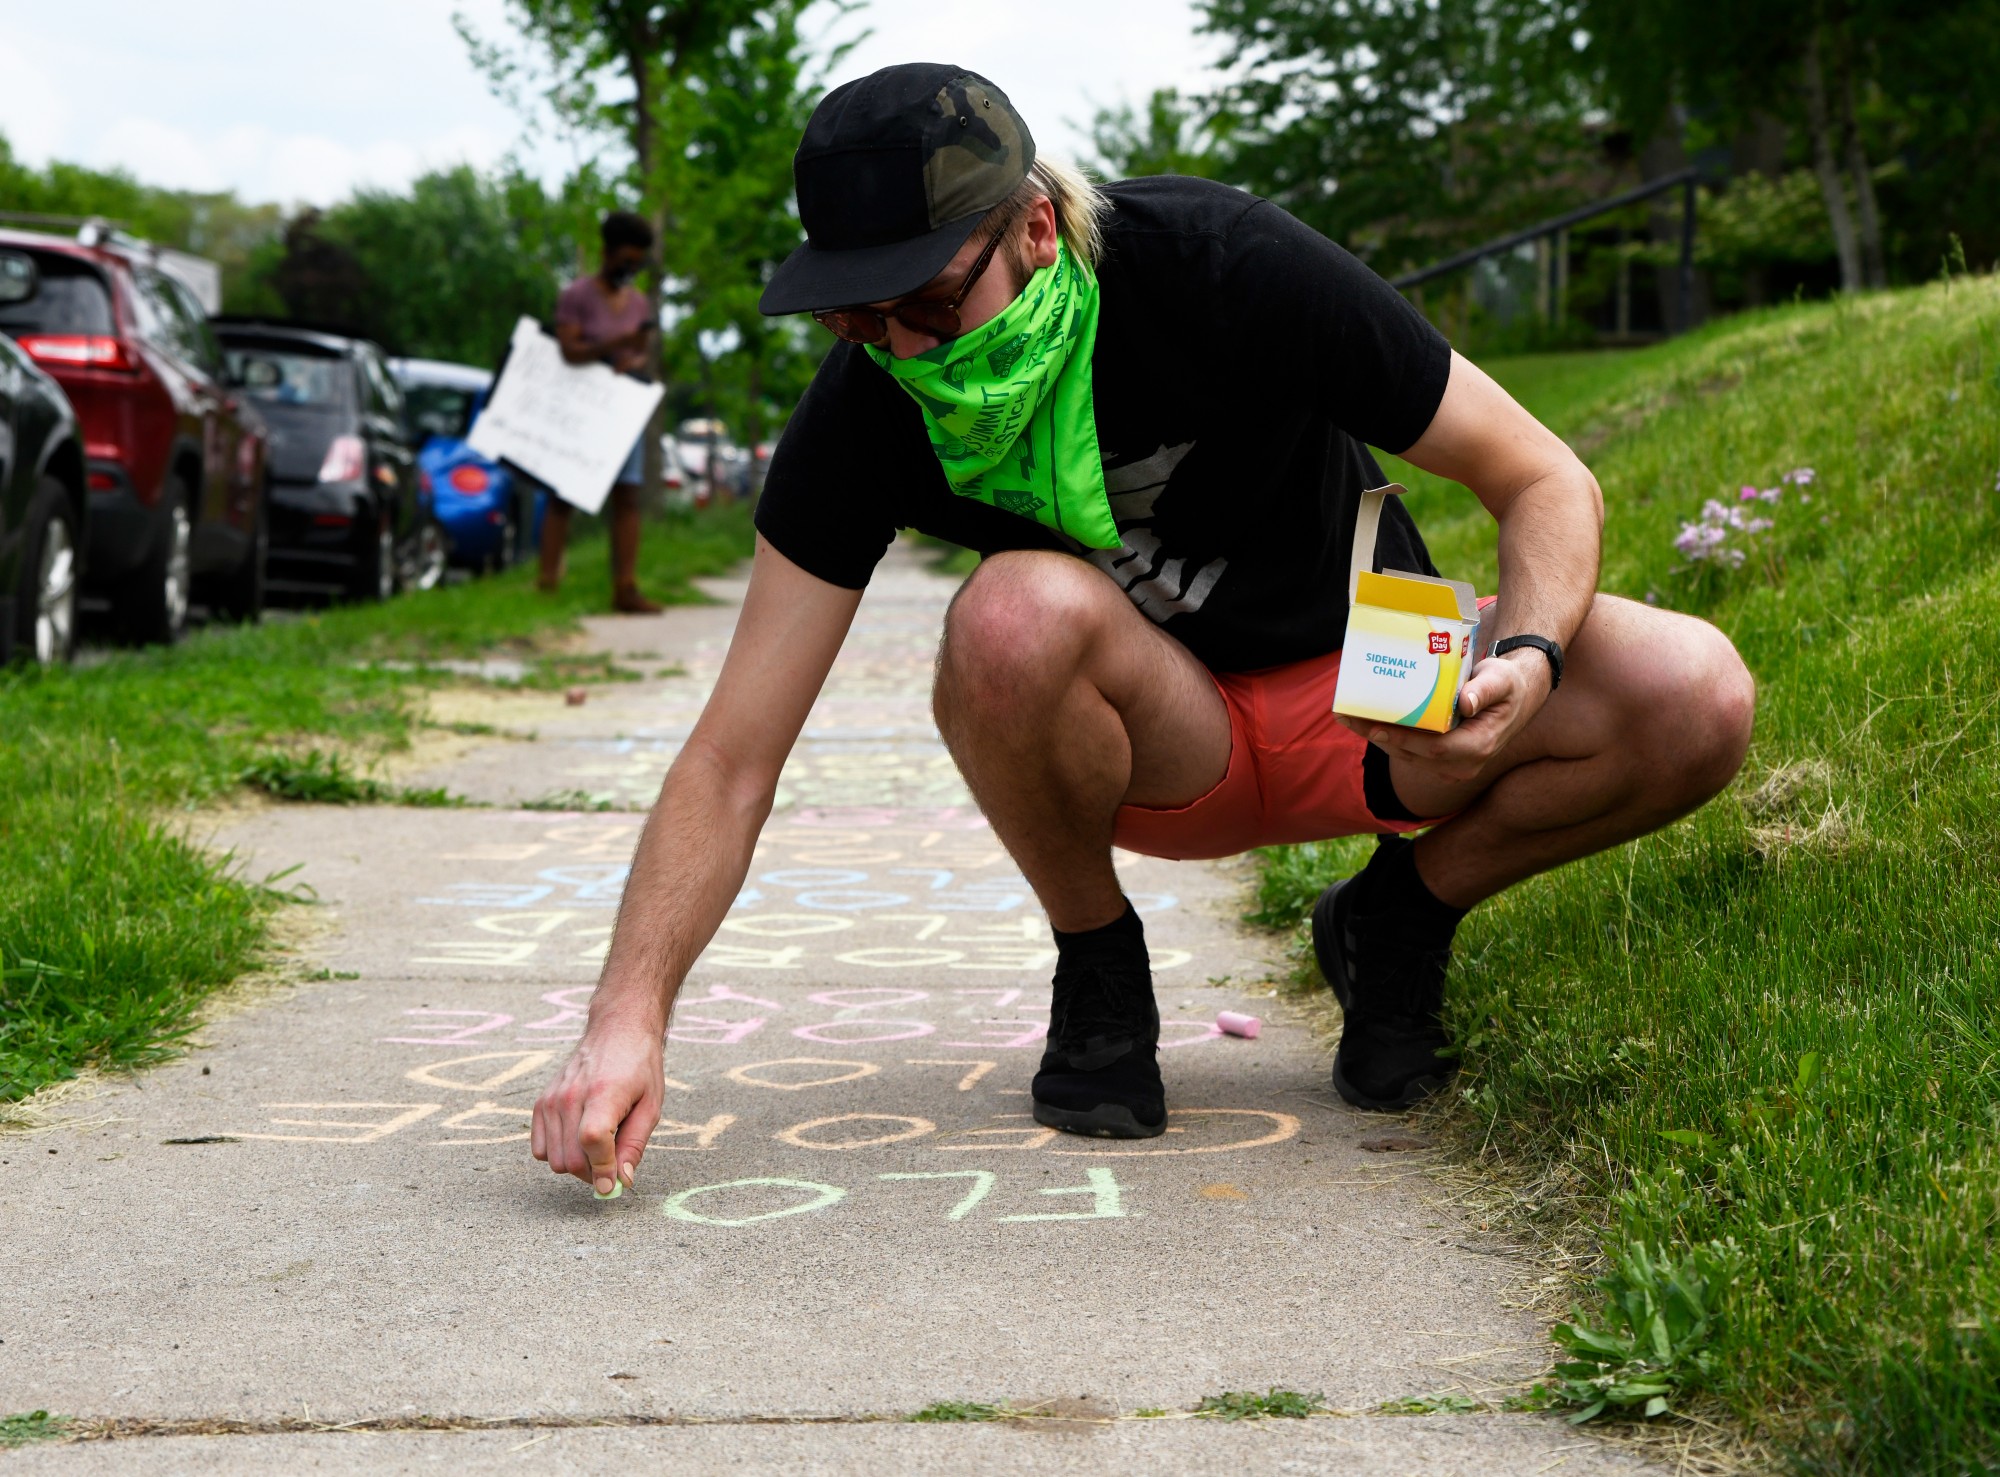 Francis Sullivan writes George Floyd’s name on the sidewalk where protesters walk towards Cup Foods on Chicago Ave S in Minneapolis on Tuesday, May 26.  Sullivan says that he does not do well in crowds but found an alternative way to support the protest. “I’m going to write [his name] until I run out of chalk,” Sullivan said. The protest was in response to the death of George Floyd in police custody. 